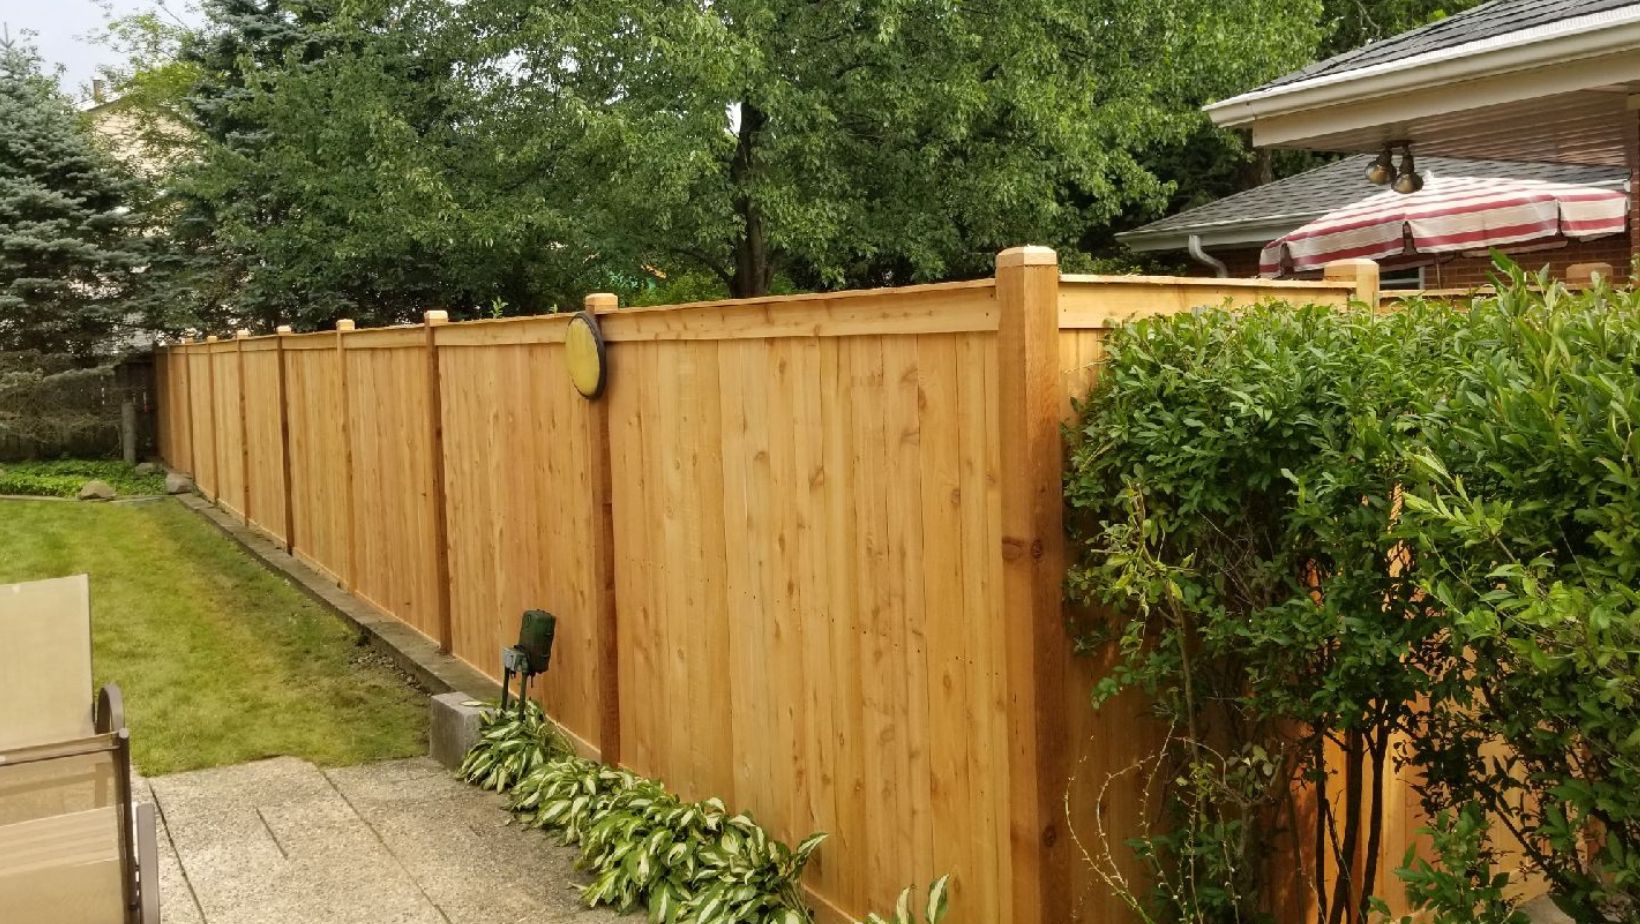 are-there-any-regulations-or-permits-required-to-install-a-wooden-fence-in-residential-areas-2